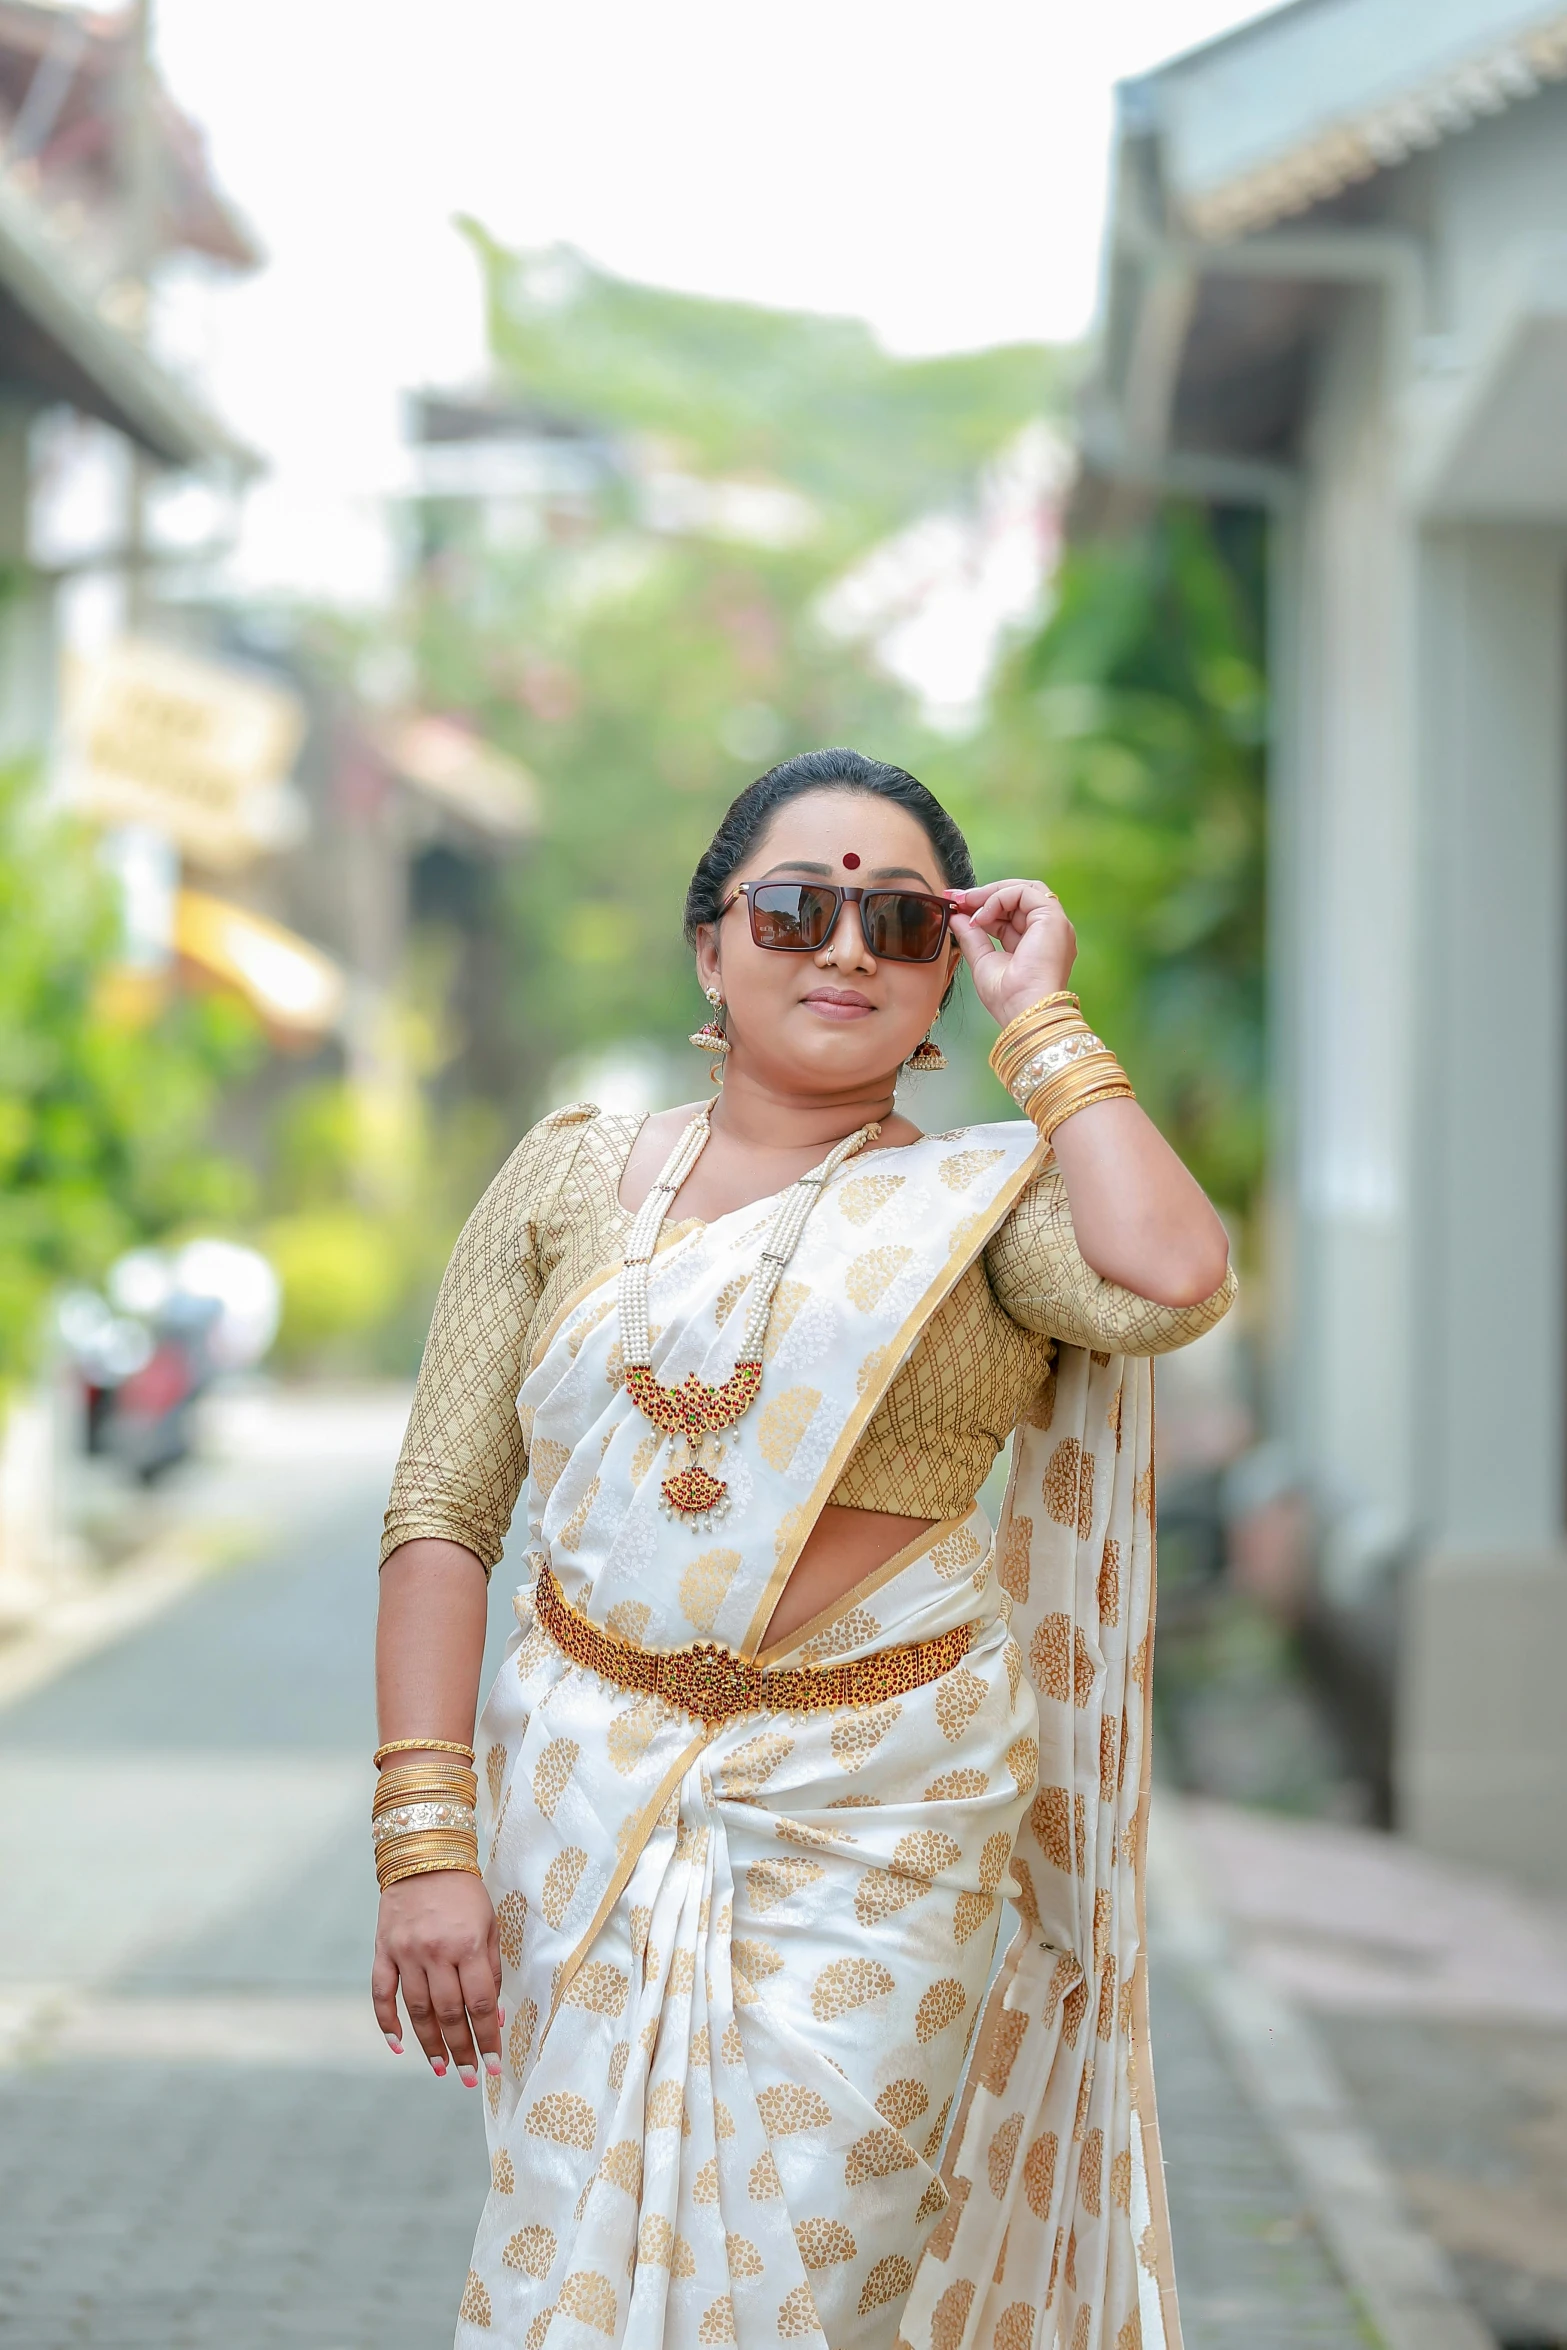 woman in white sari standing on street with her hand to her forehead